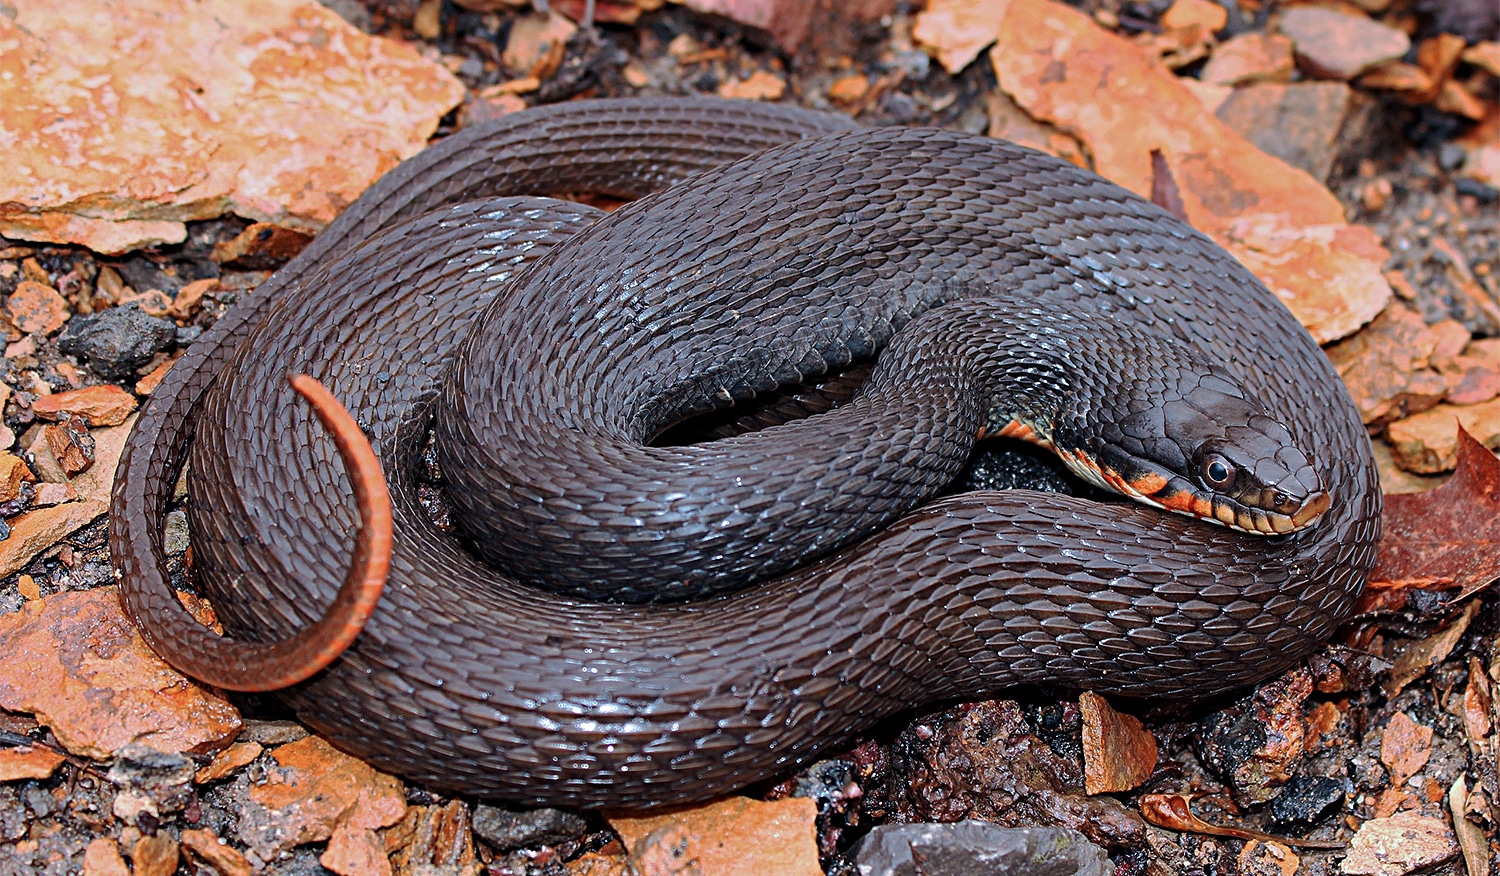 horizontal photo of a copperbelly snake curled on dried leaves. Image credit: Peter Paplanus, CC BY 2.0, via Wikimedia Commons